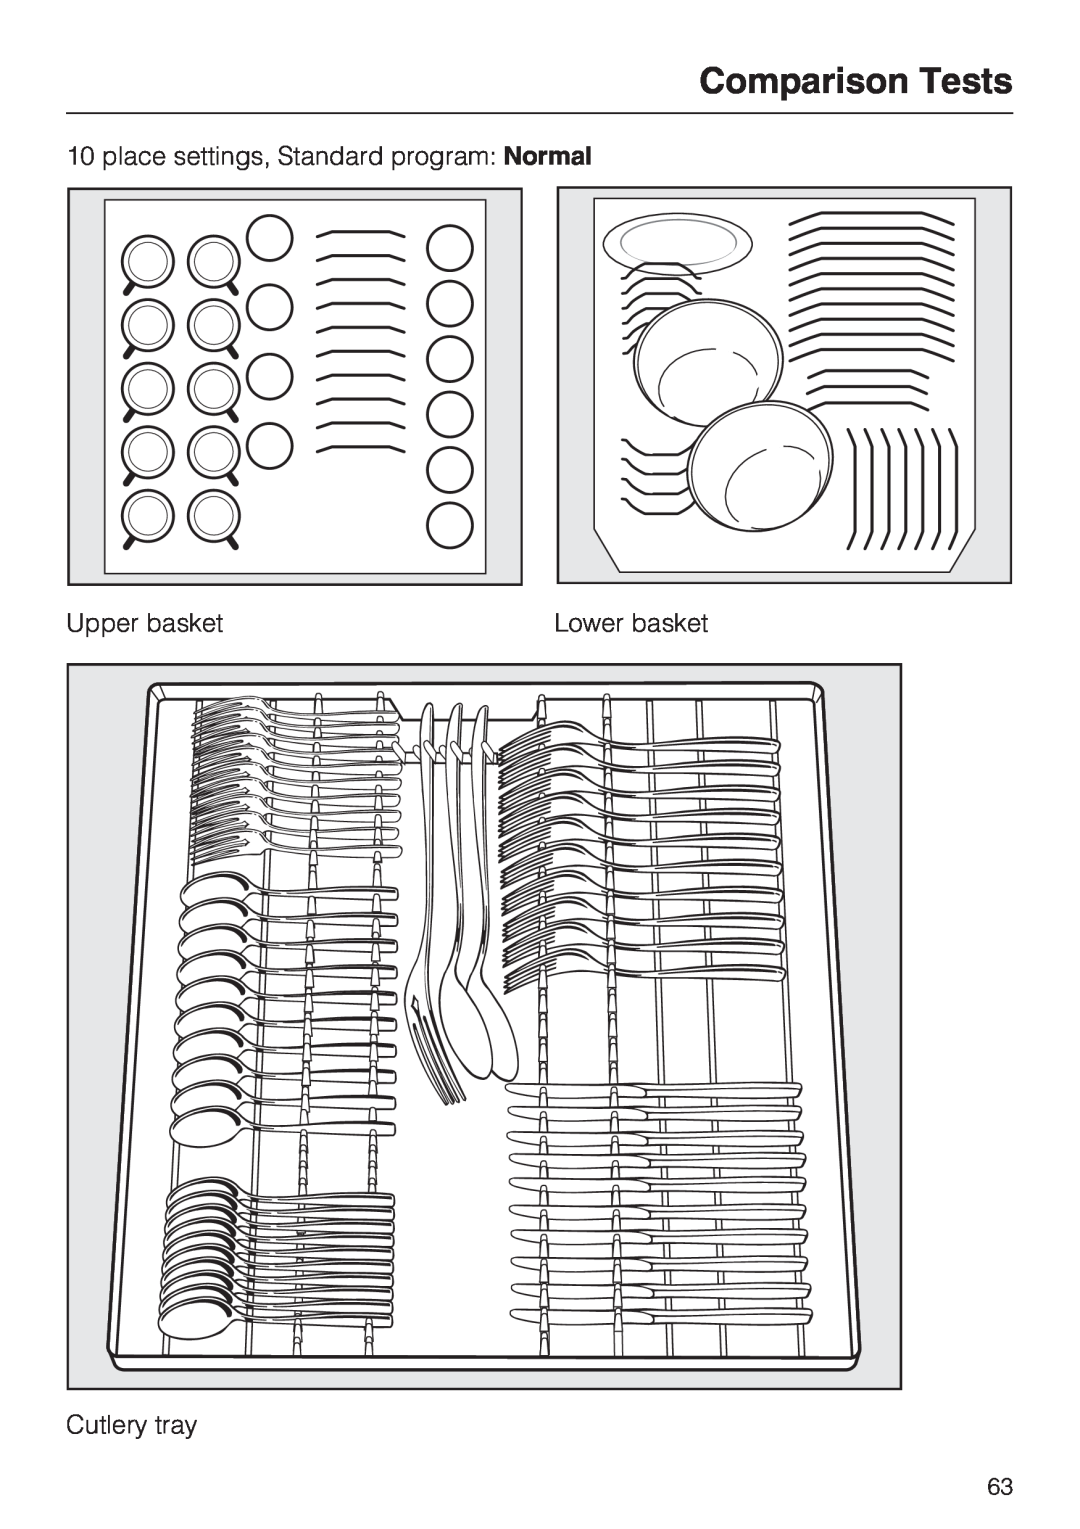 Miele G 2832 manual Comparison Tests, place settings, Standard program Normal, Upper basket, Lower basket, Cutlery tray 